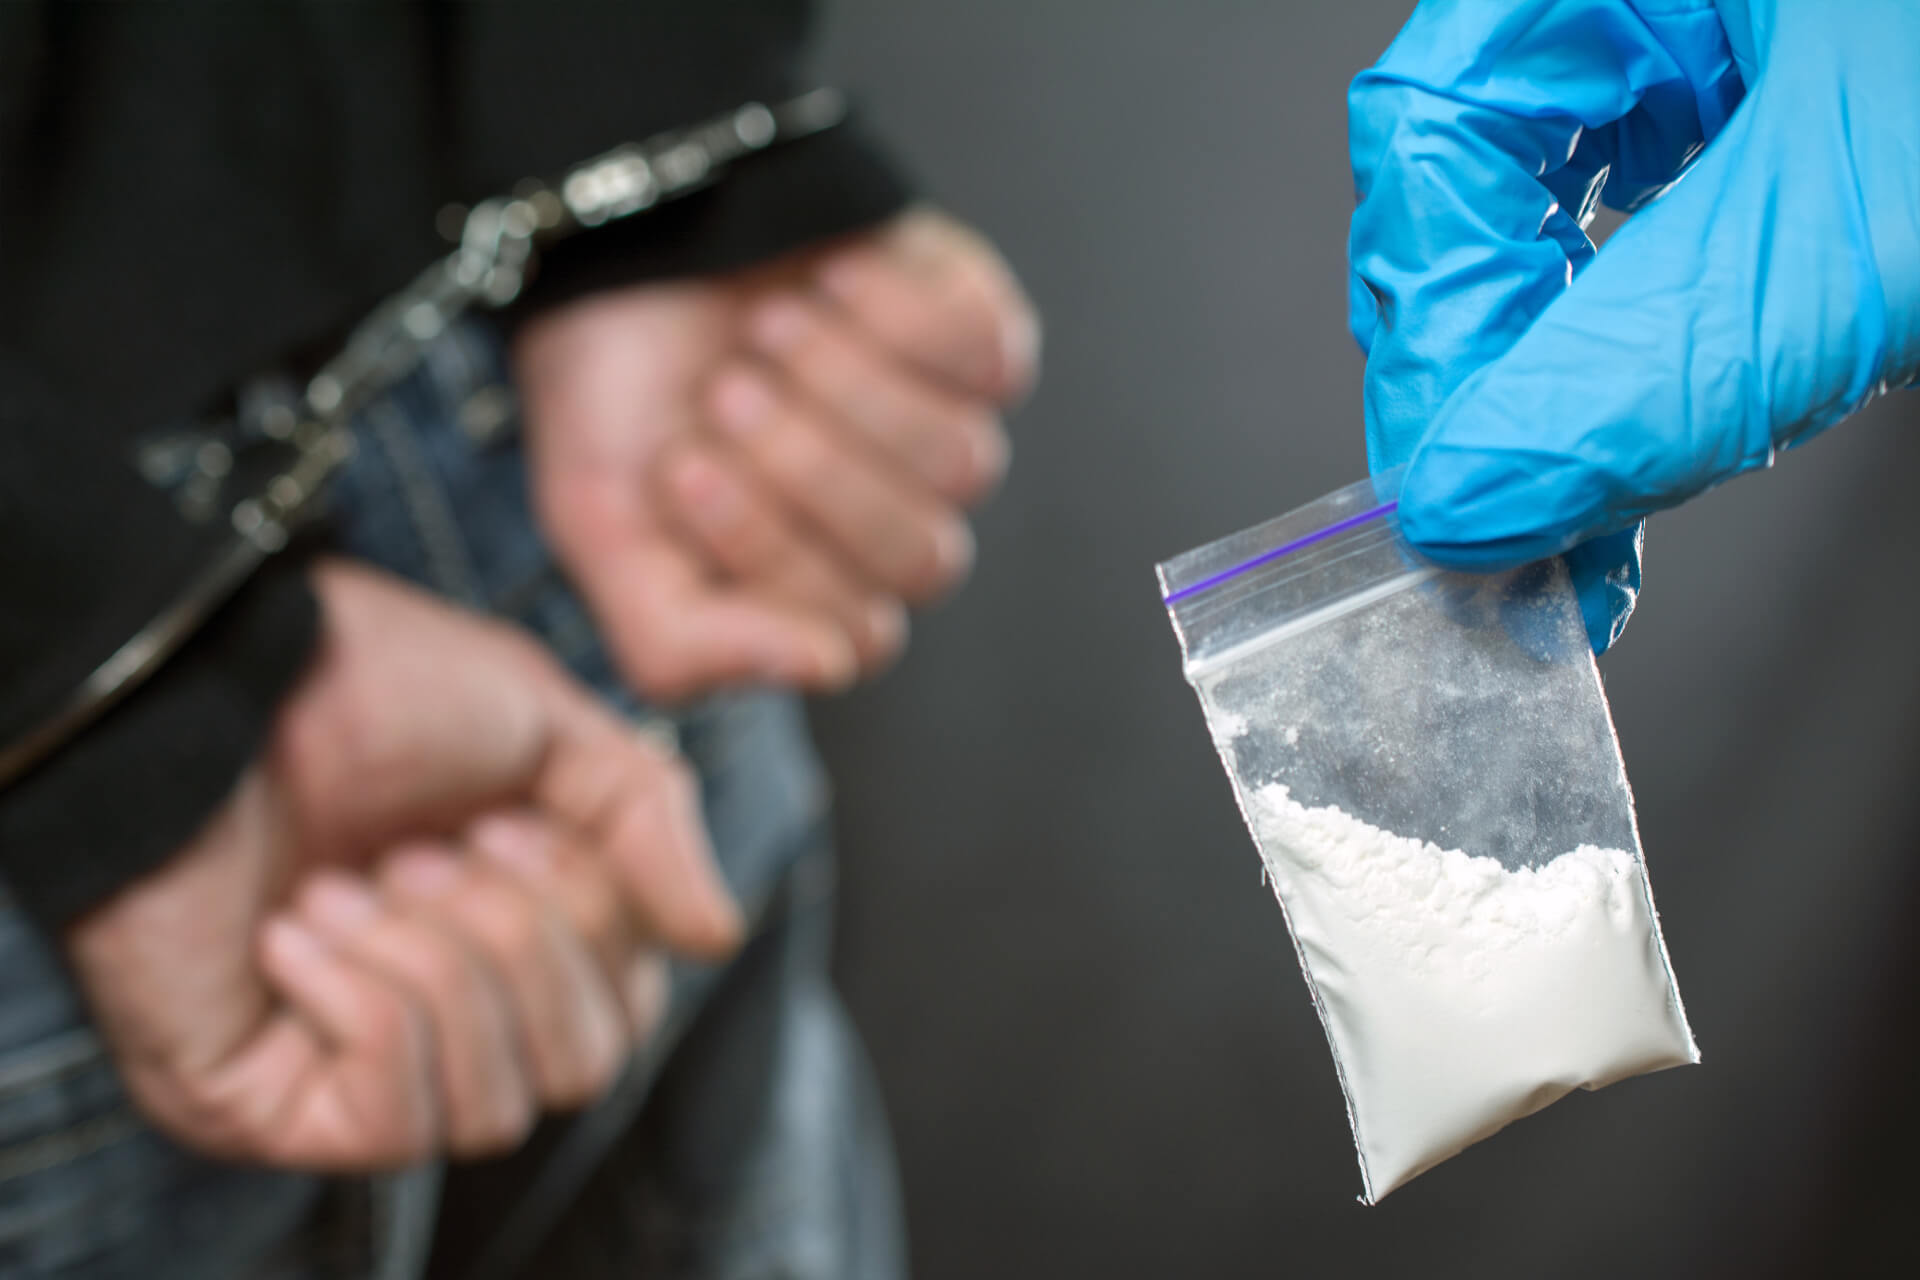 Can You Be Charged With Possession If Police Find Drugs In Your Car?